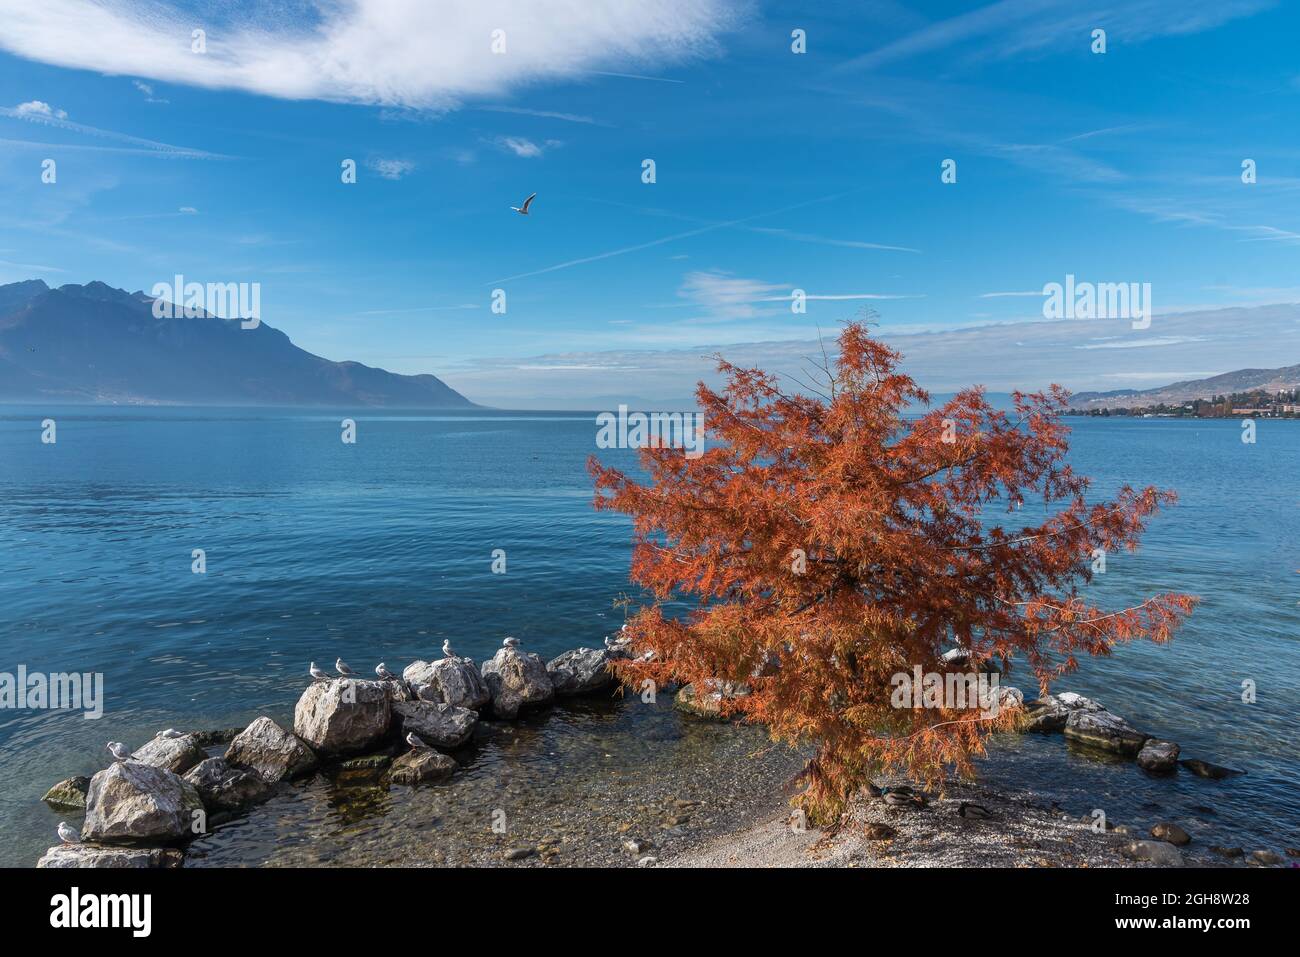 Photo with copy space of a tree with red leaves on the edge of an alpine lake shore surrounded by stones in a sunny day Stock Photo